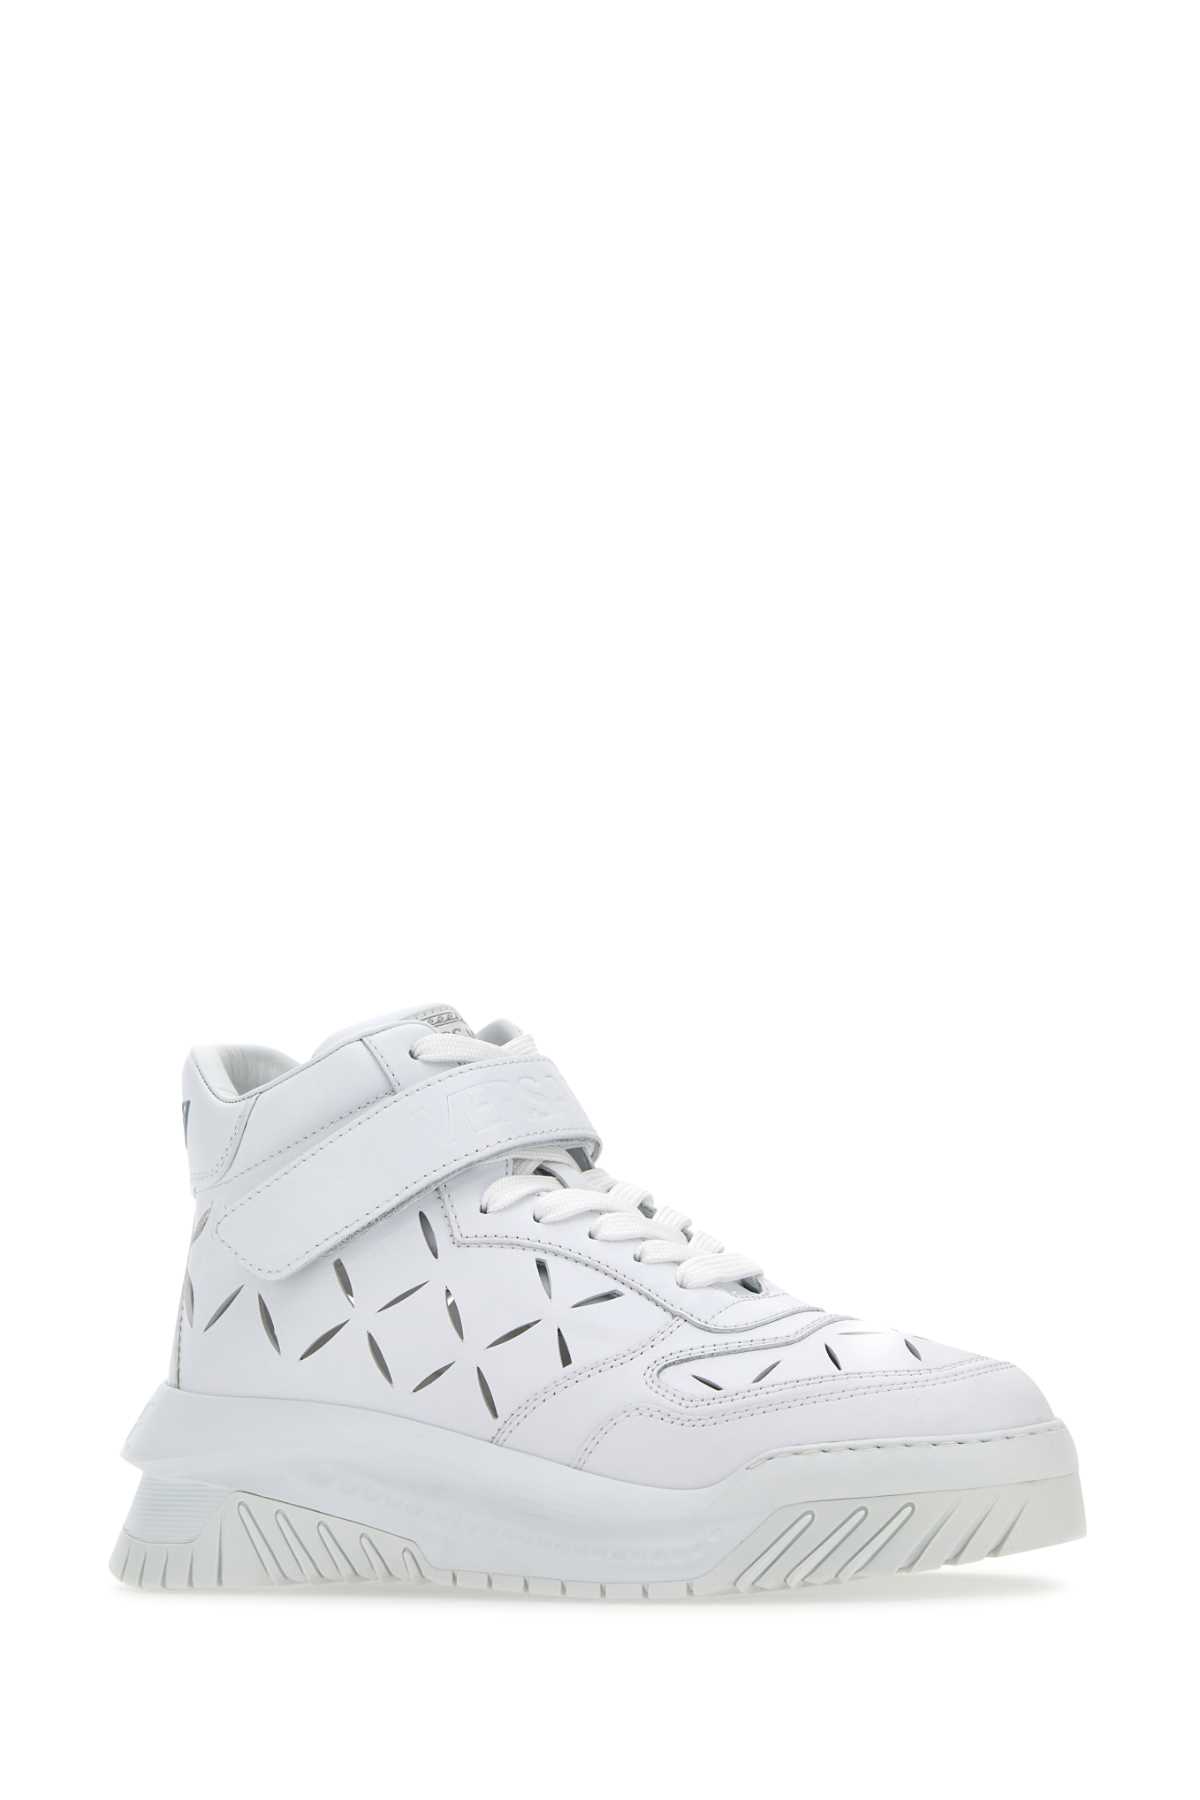 Versace White Leather Odissea Sneakers In 1w00p